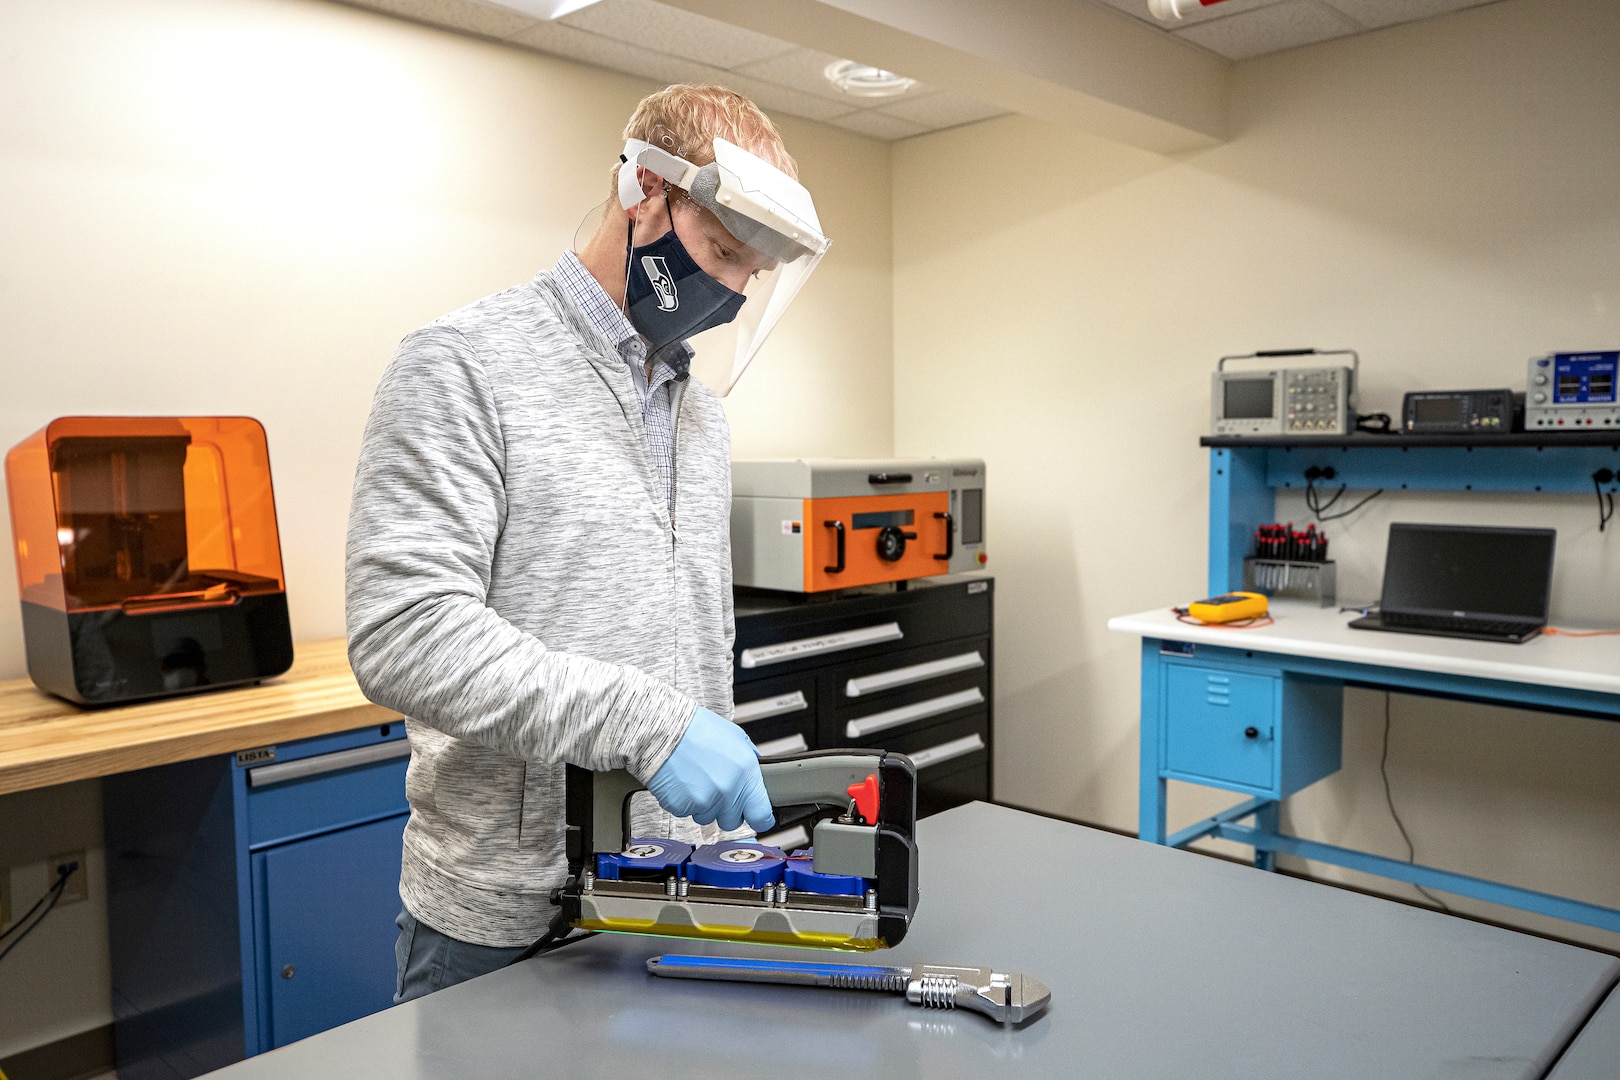 Branden Doyle, Code 2301 nuclear innovation program manager, sanitizes a crescent wrench Nov. 13, 2020, using a UVC-LED Handheld Sanitizer designed by employees in the PSNS Innovation Lab in Building 435 at Puget Sound Naval Shipyard & Intermediate Maintenance Facility in Bremerton, Washington.